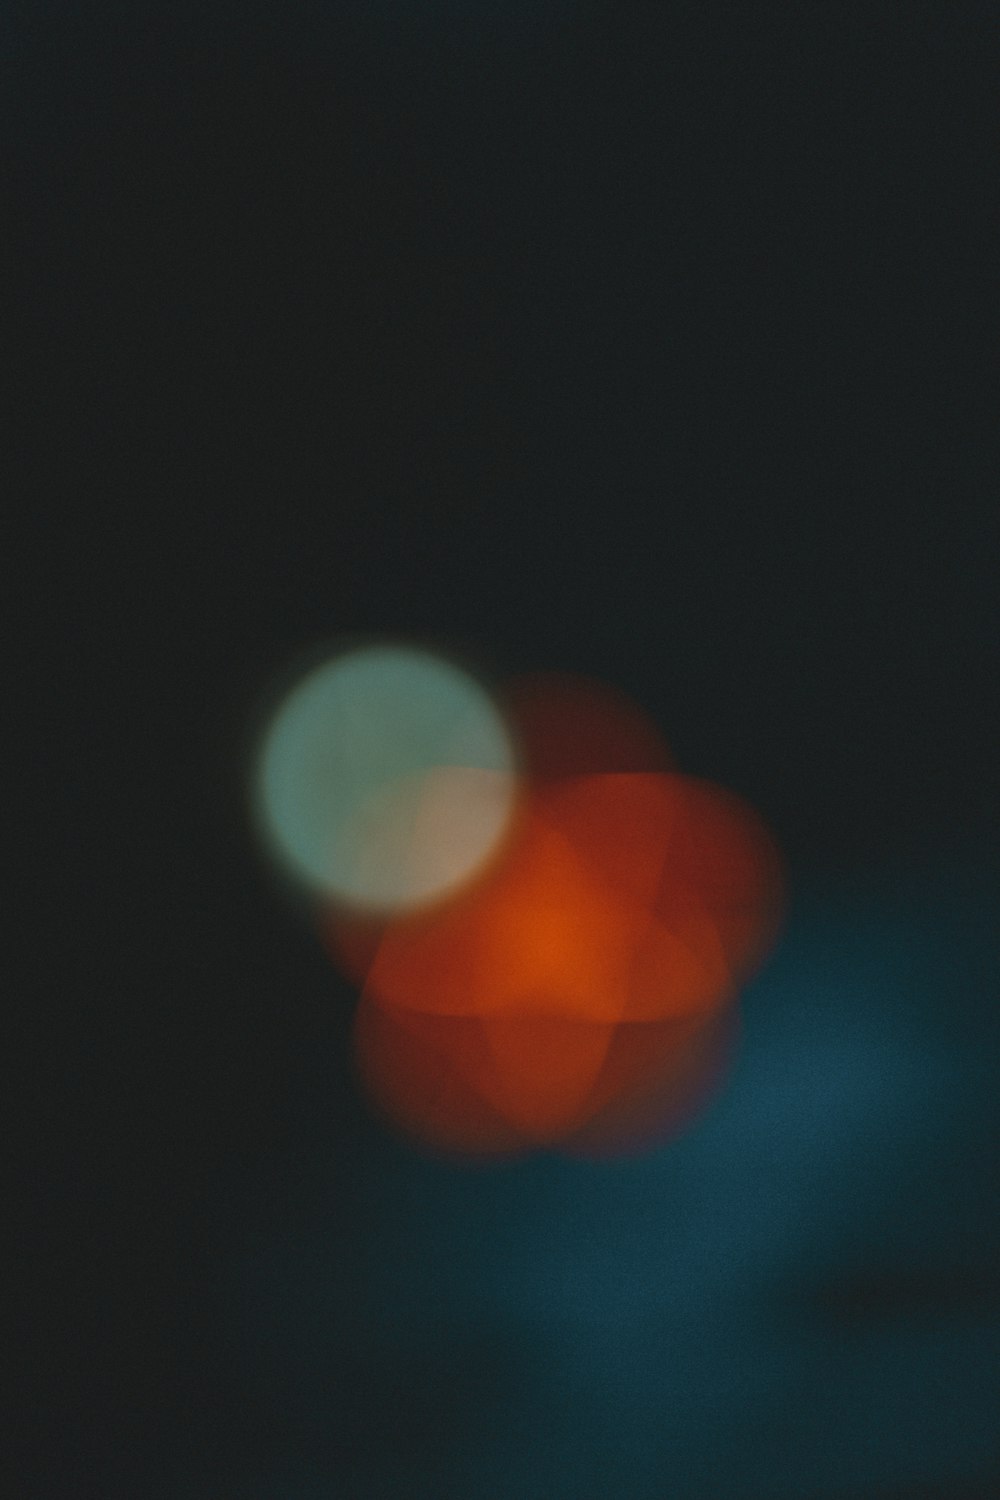 a blurry image of a street light in the dark